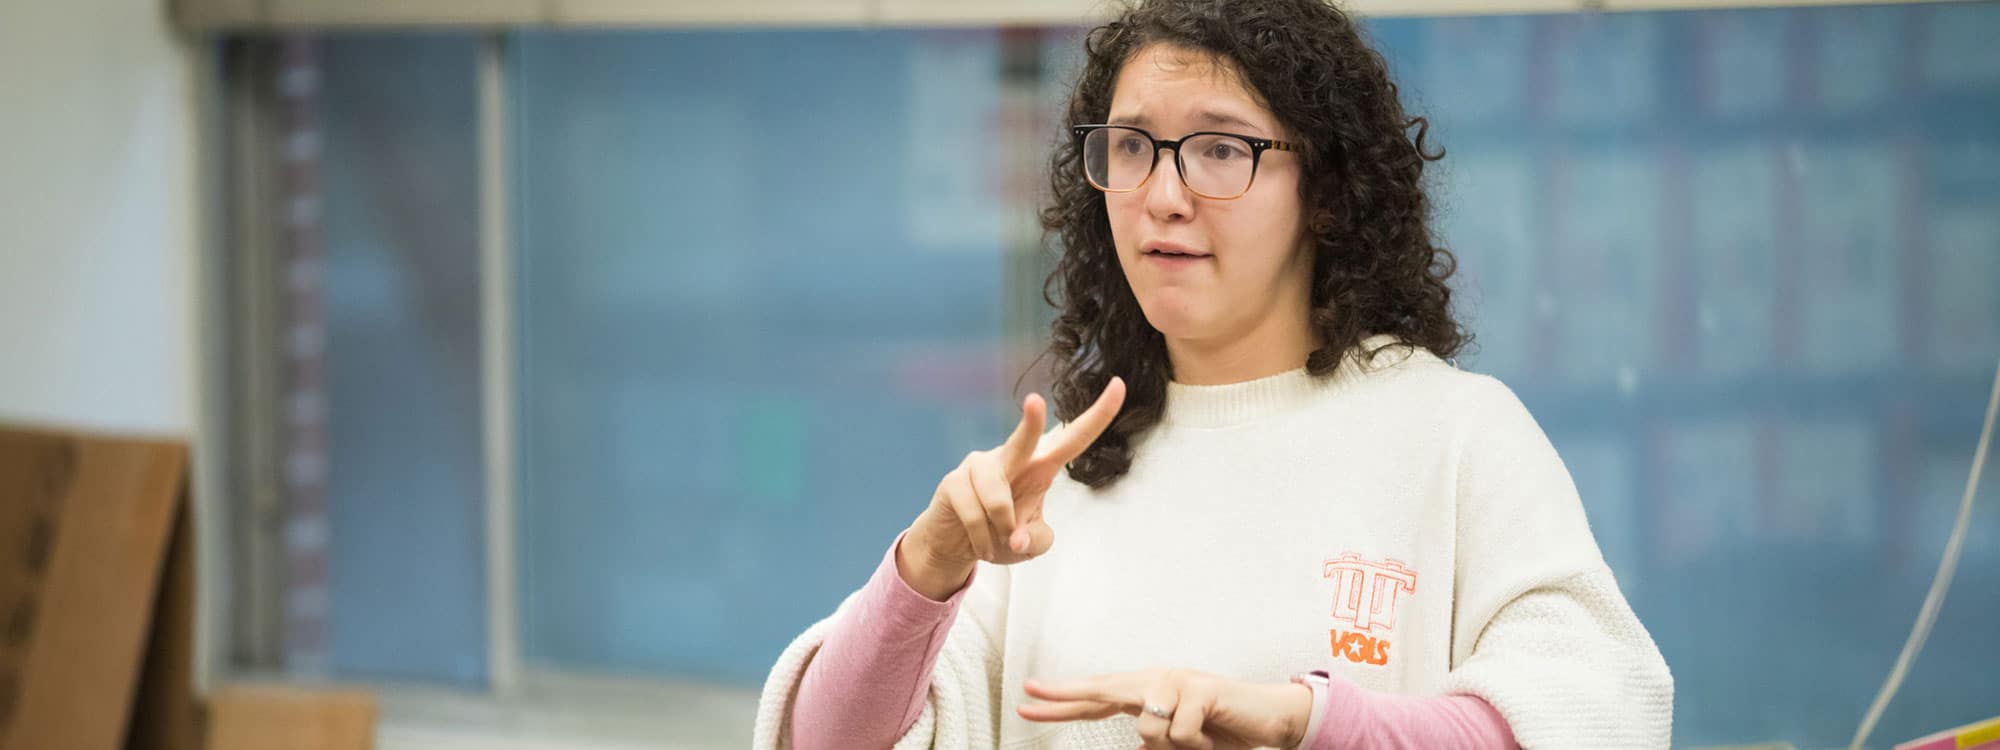 Lexi Wilkinson, a student signing in a Deaf Education class